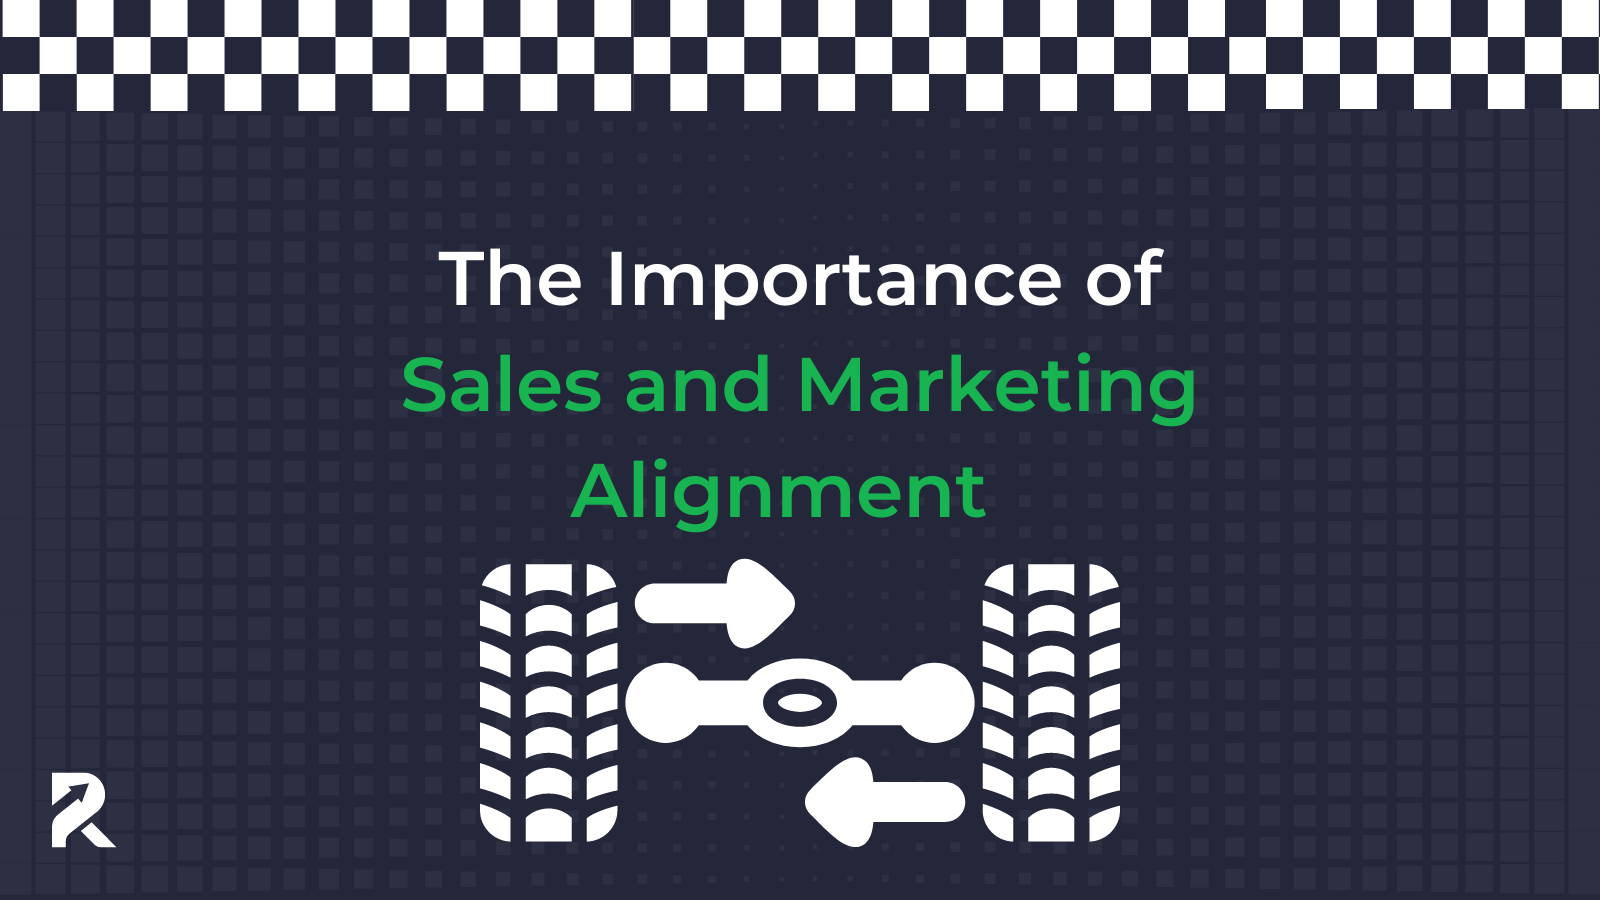 The Importance of Sales and Marketing Alignment